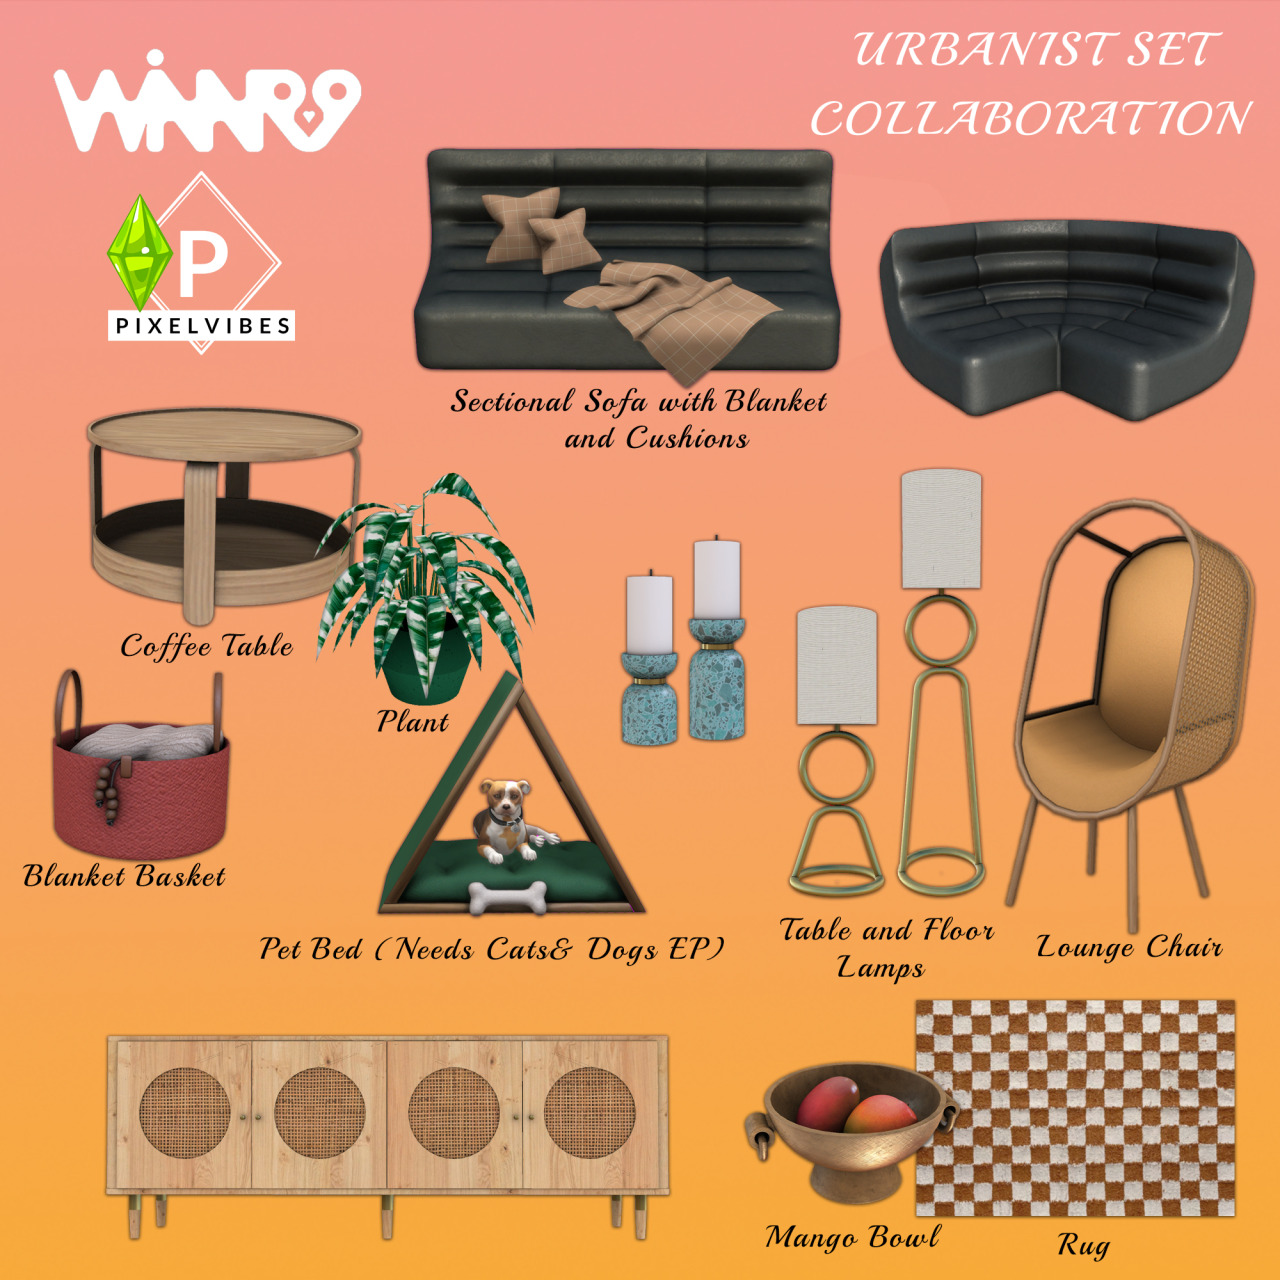 Hi everyone,
Today we present you a small collaboration between me and Winner9 in urbanism style. Here you can find in total 16 objects. Have fun!
Links are below
Winner9 HERE
Pixelvibes HERE